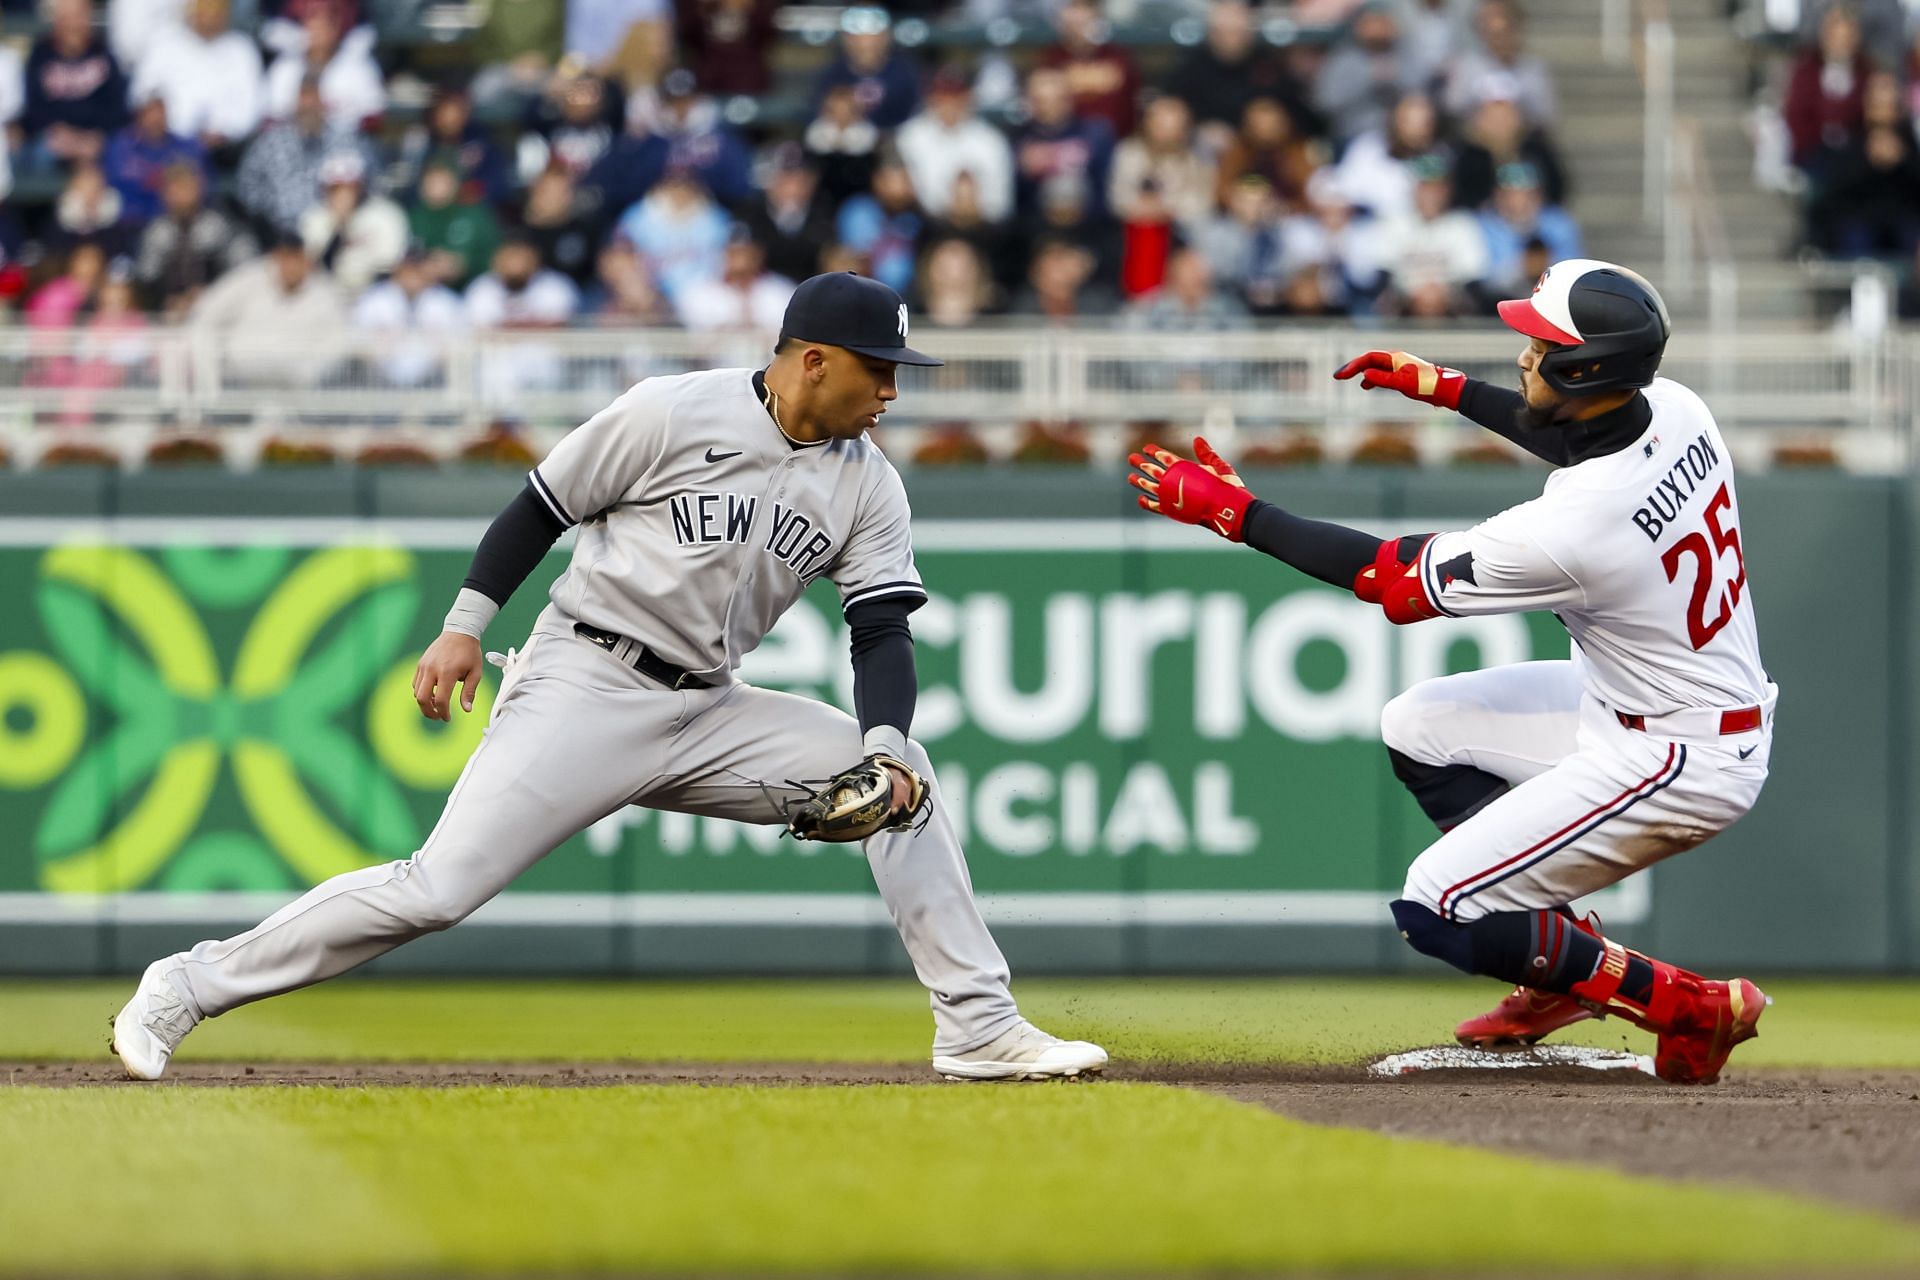 Yankees drop season series to Twins for first time since 2001 – Trentonian